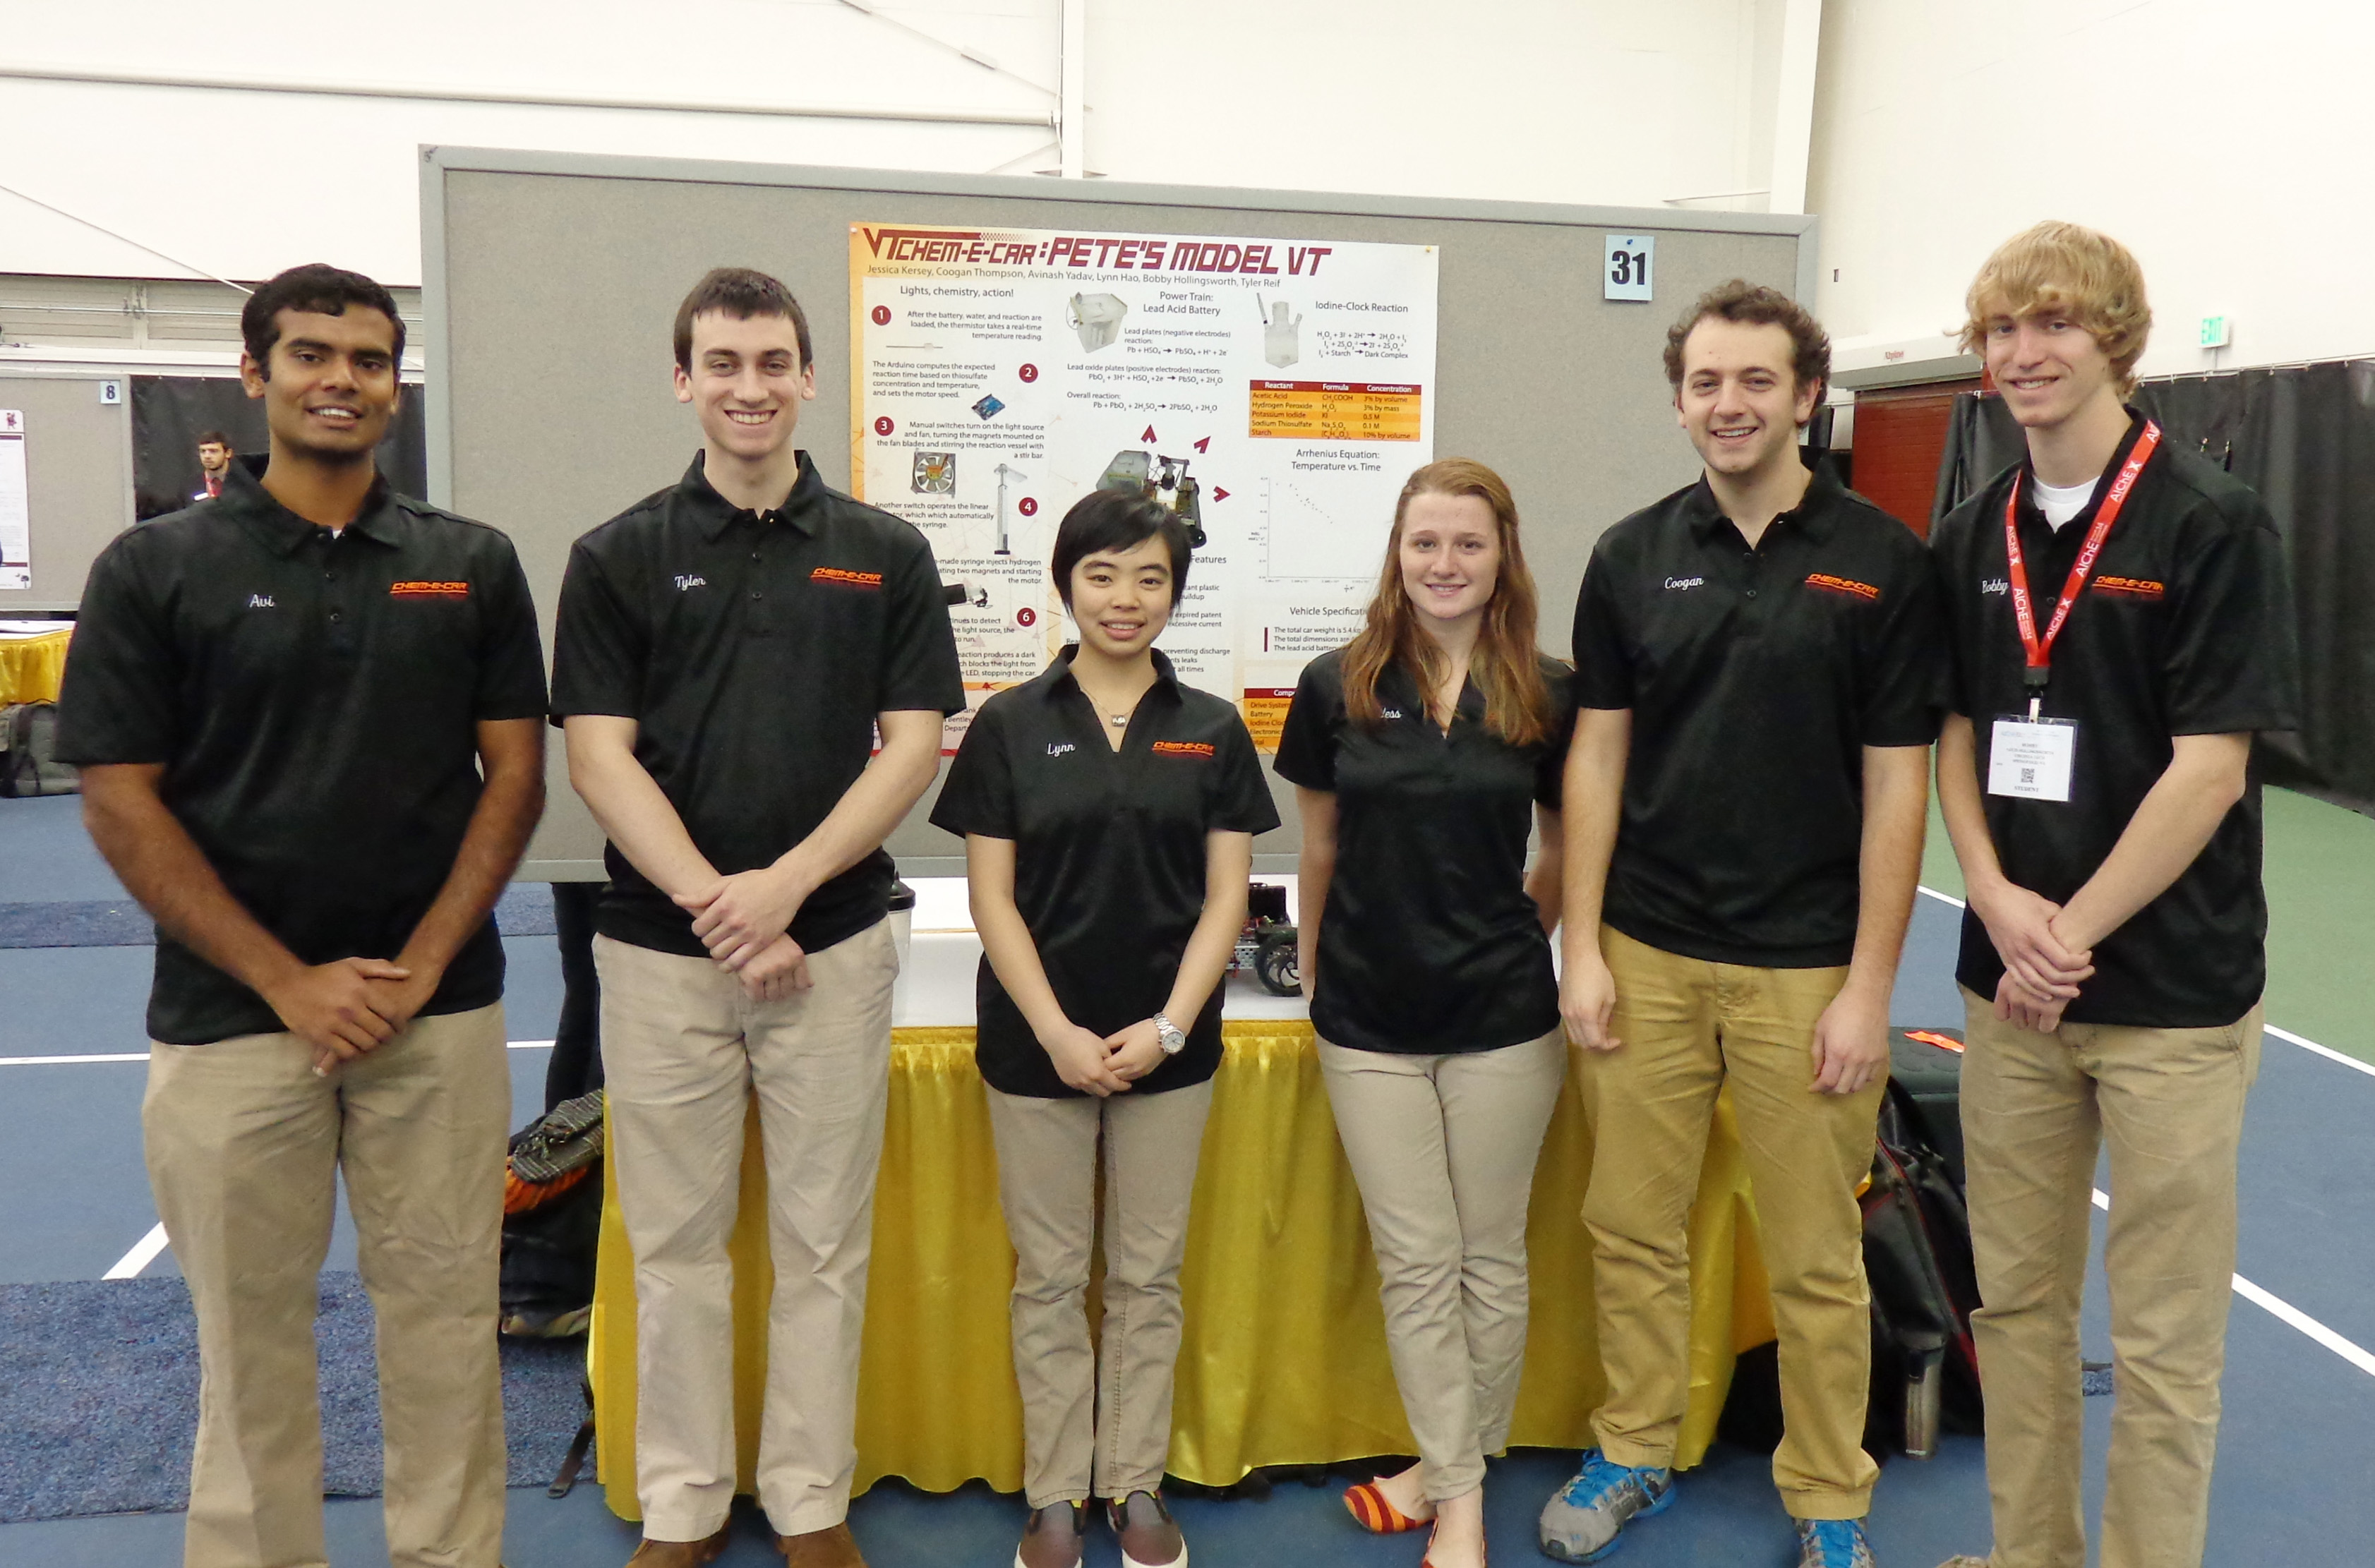 From left to right are the members of the Virginia Tech Chem-E Car Team: Avinash Yadav, Tyler Reif, Yining Hao, Jessica Kersey, Coogan Thompson, and Bobby Hollingsworth. 